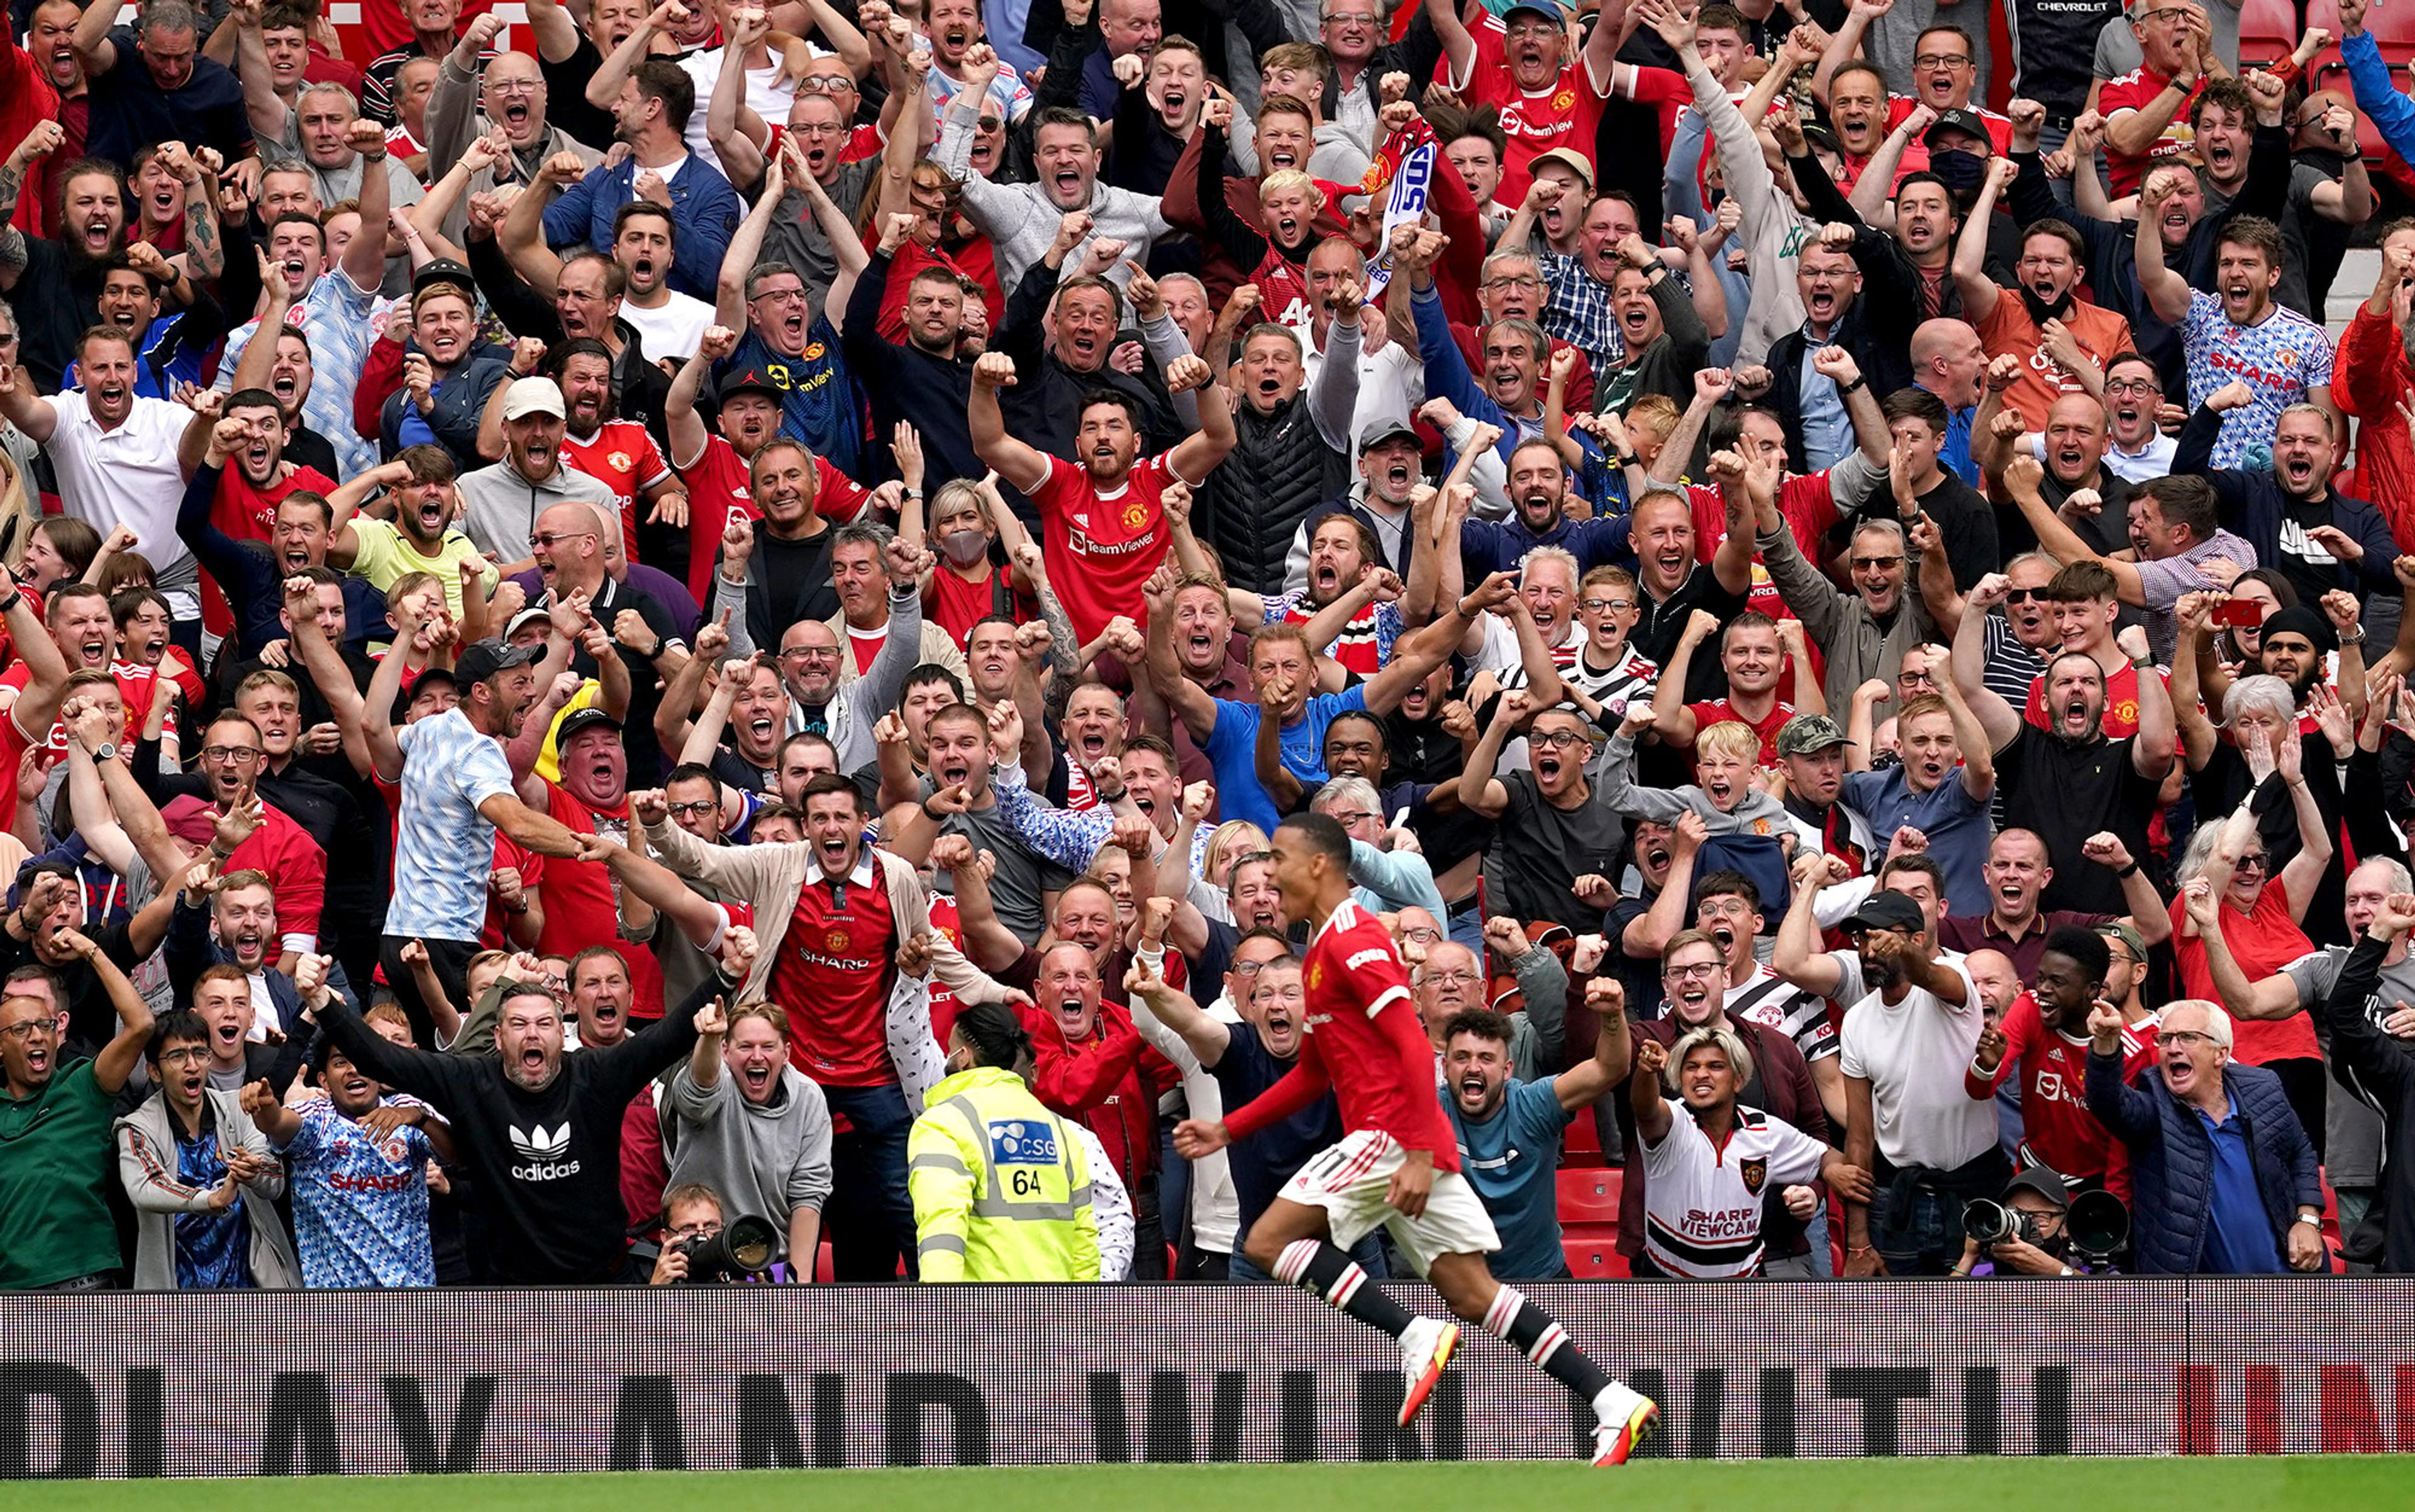 A footballer in the Manchester United red strip runs past cheering fans in the stadium